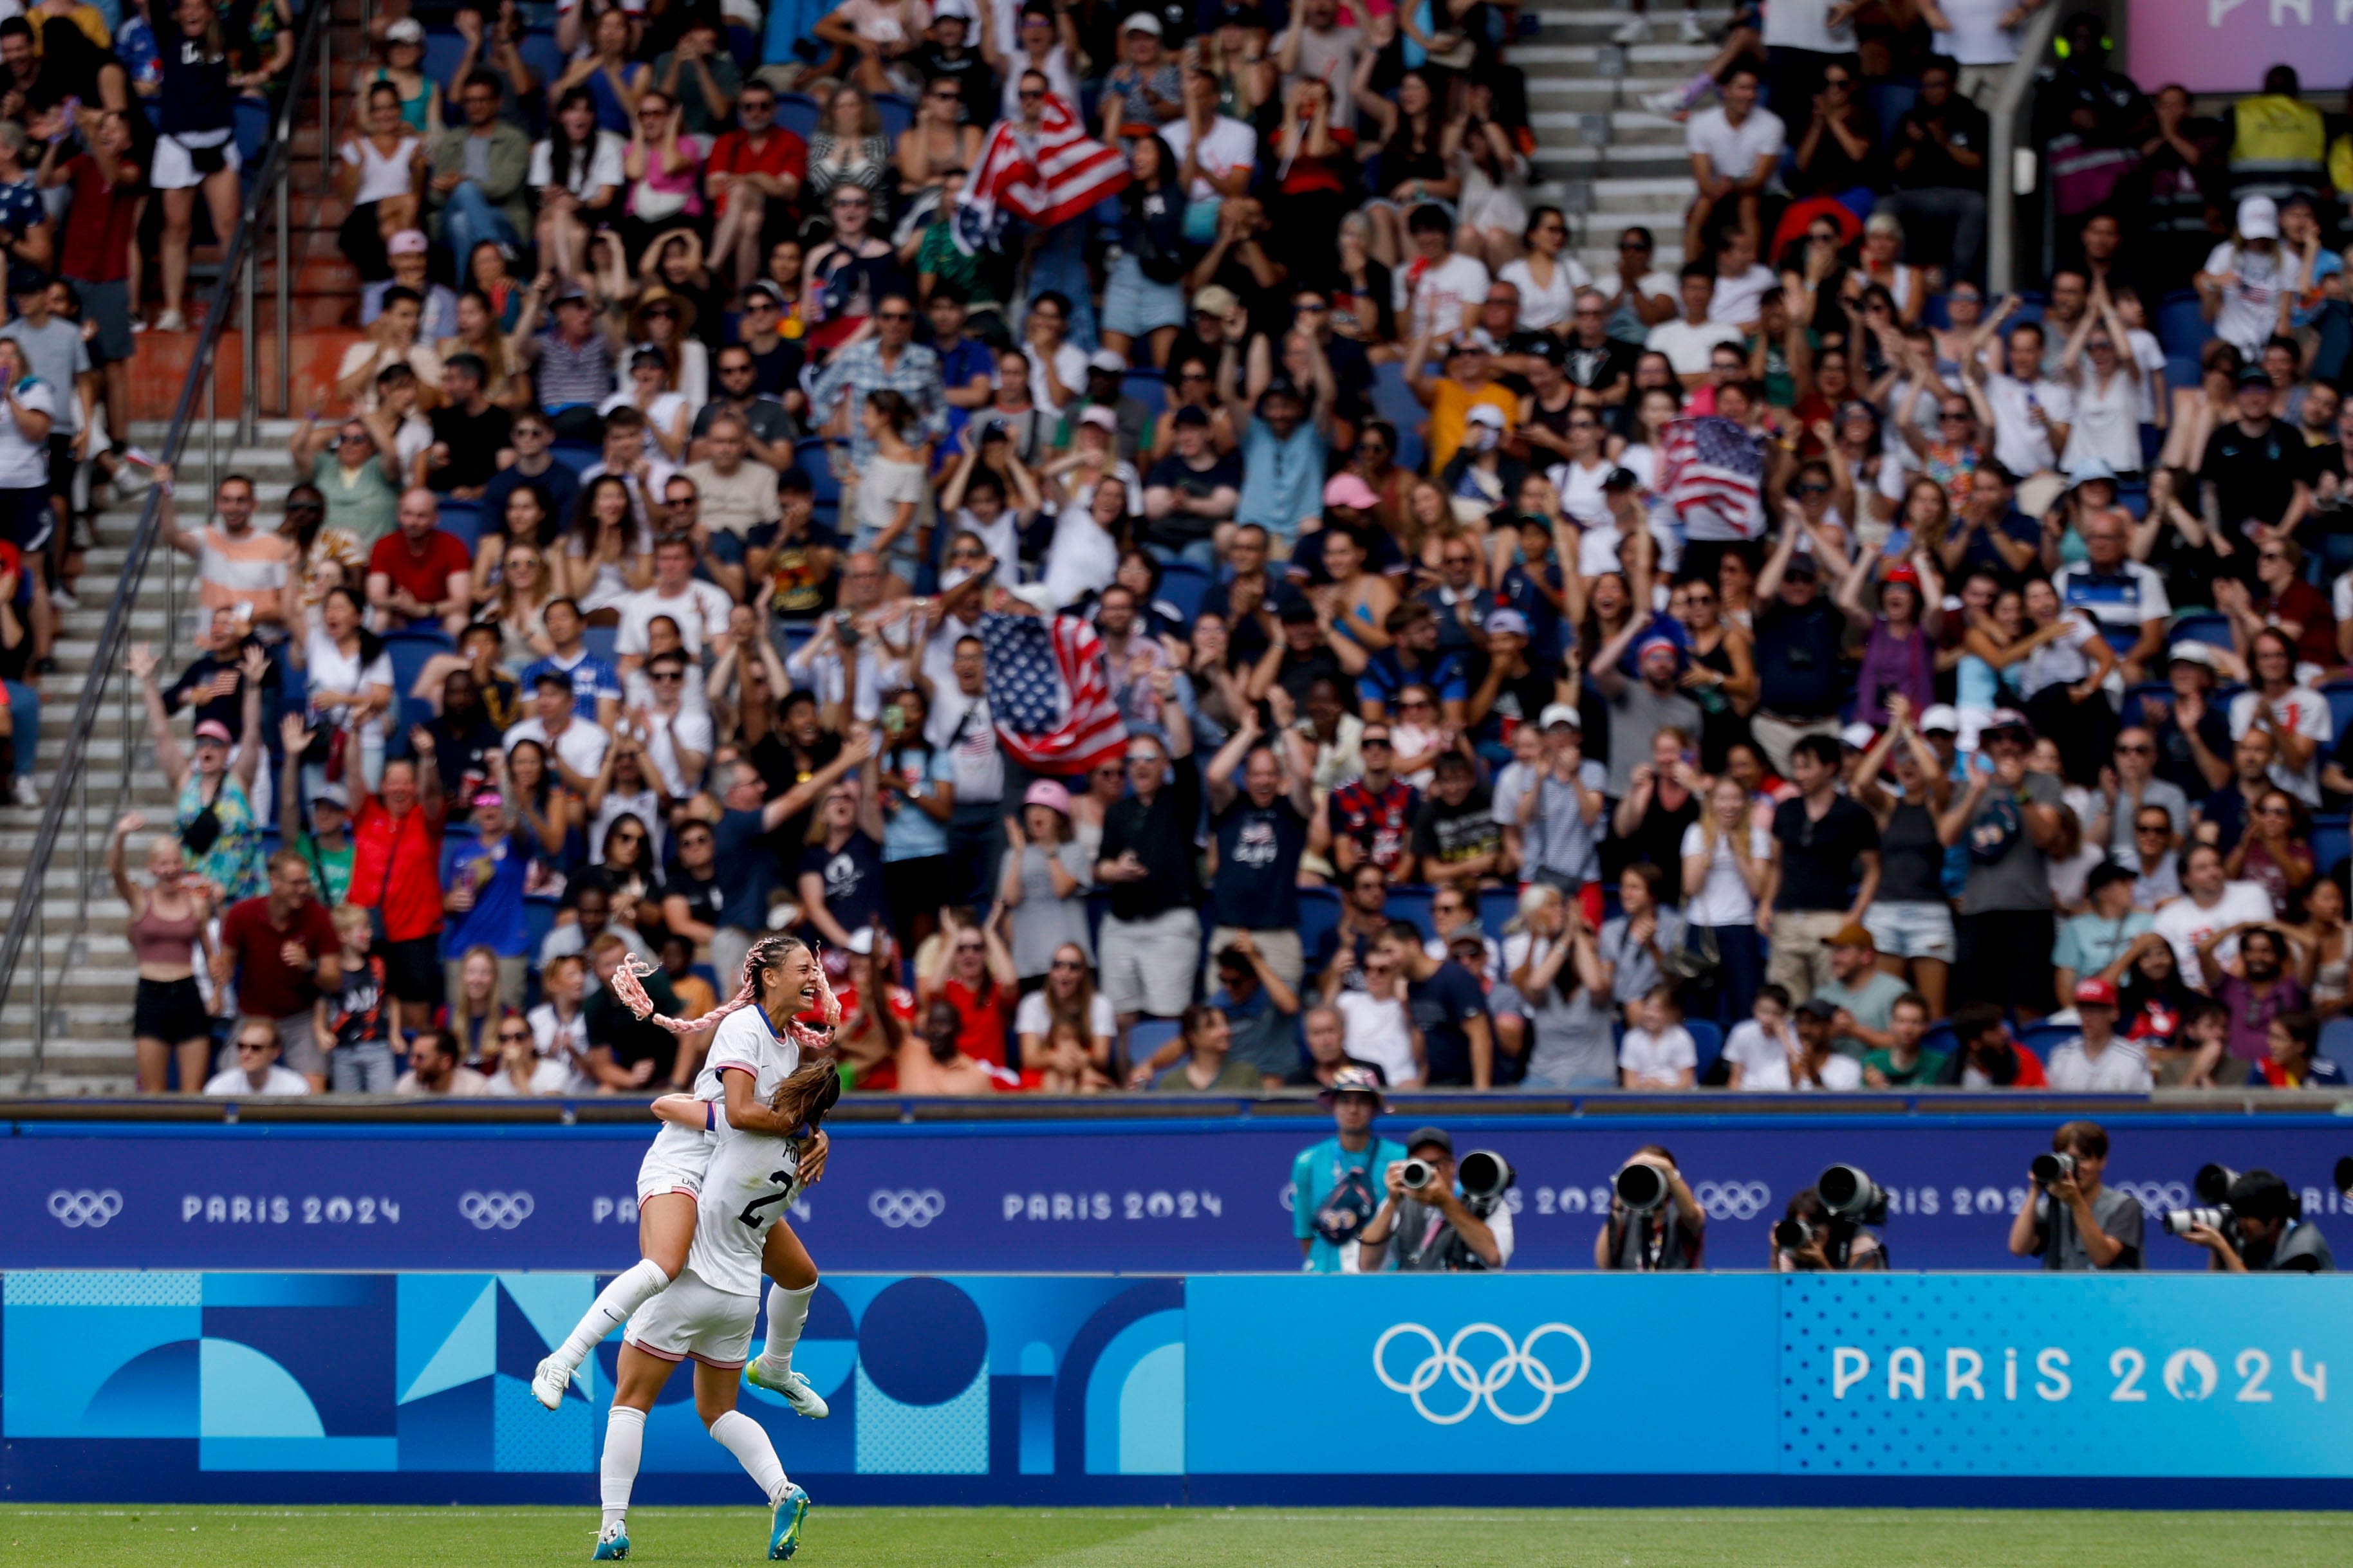 How to watch Team USA women's soccer vs Germany in 2024 Paris Olympics on TV Tuesday